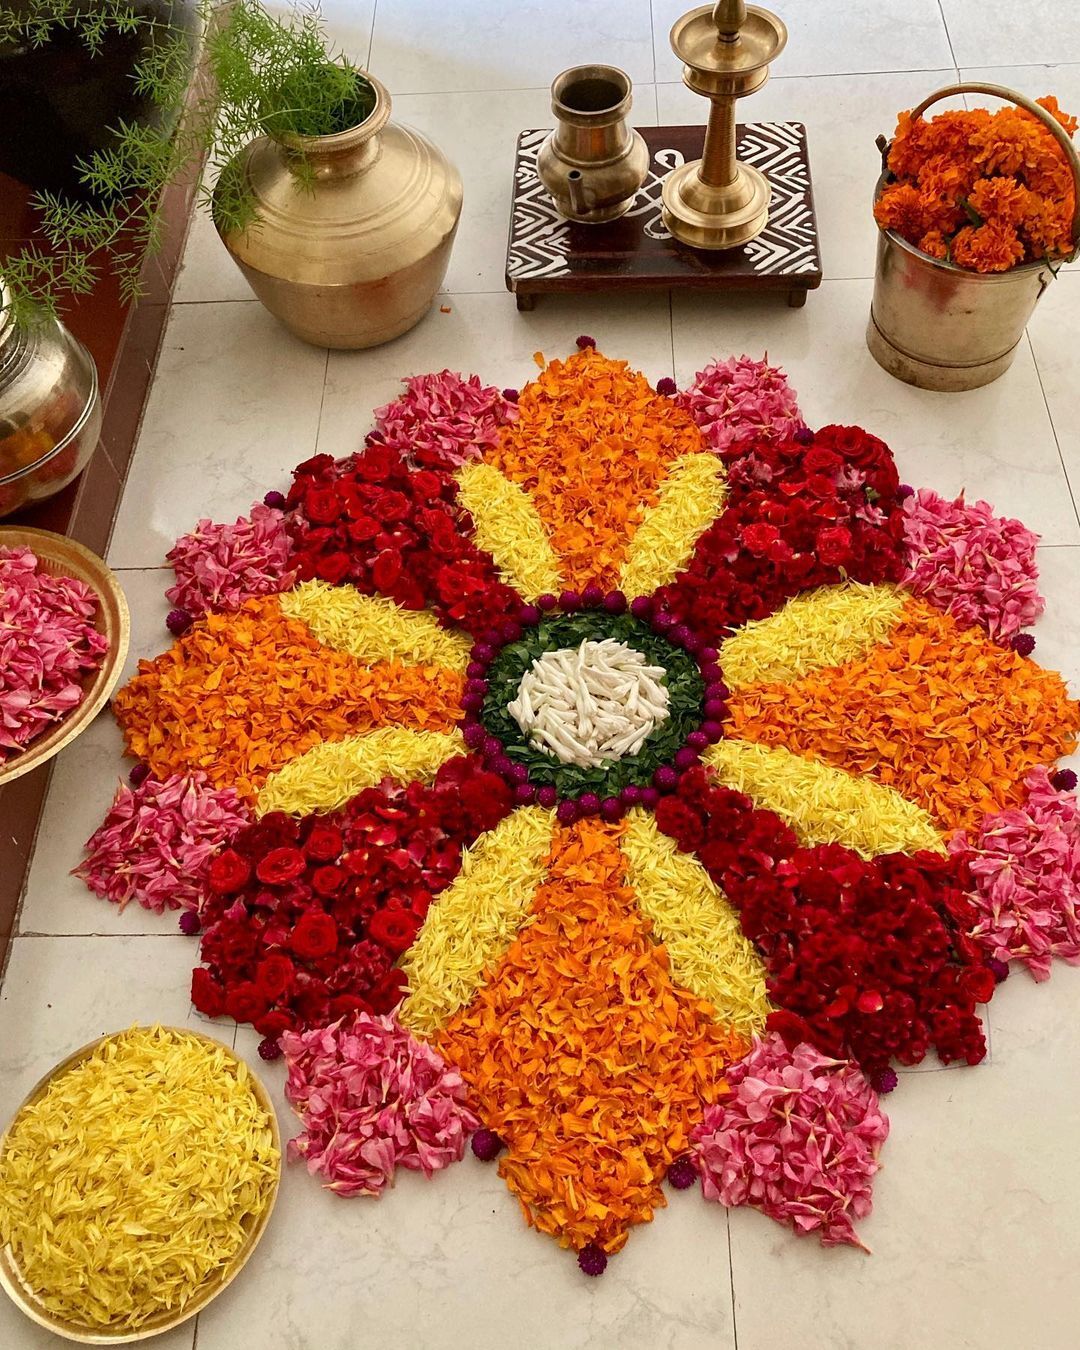 8 Onam Decoration Ideas - To Creatively Decorate Your Home